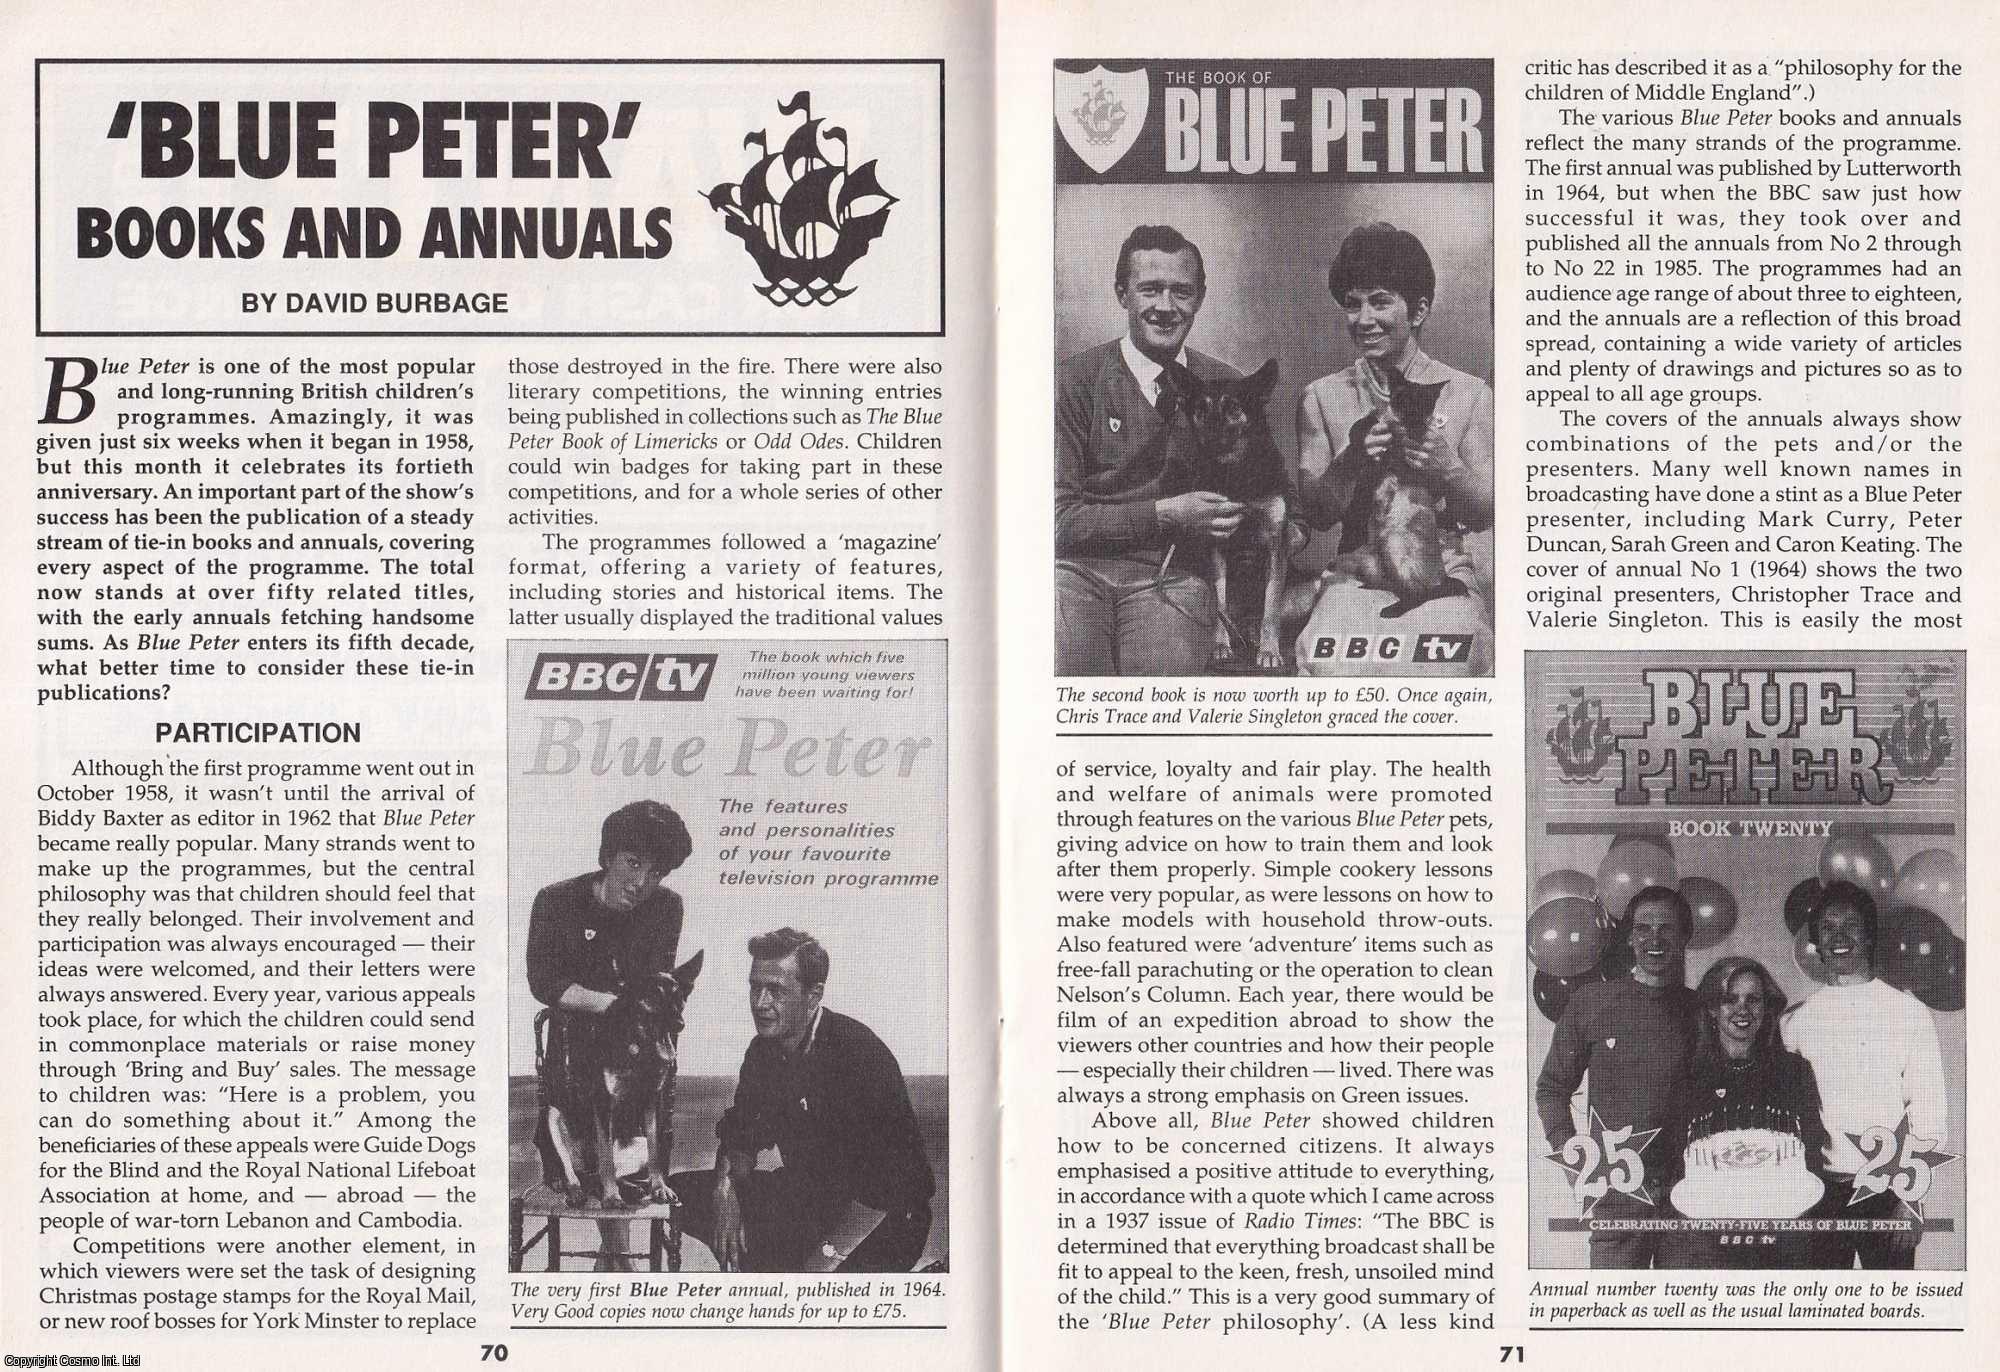 David Burbage - Blue Peter Books and Annuals. This is an original article separated from an issue of The Book & Magazine Collector publication.